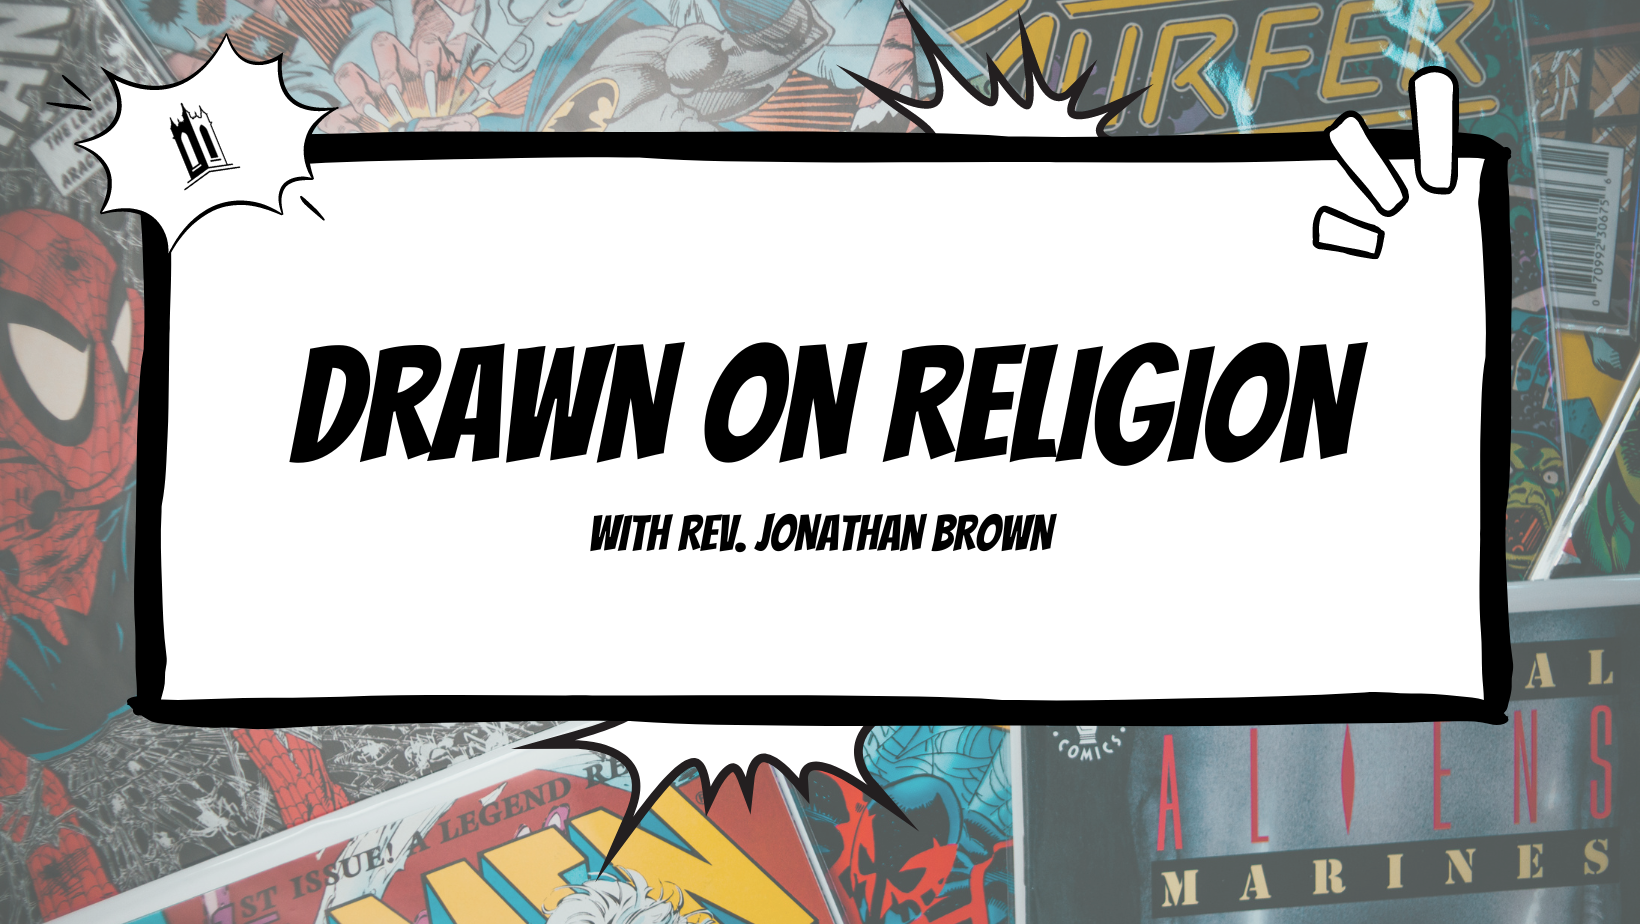 Drawn on Religion with Pastor Jonathan